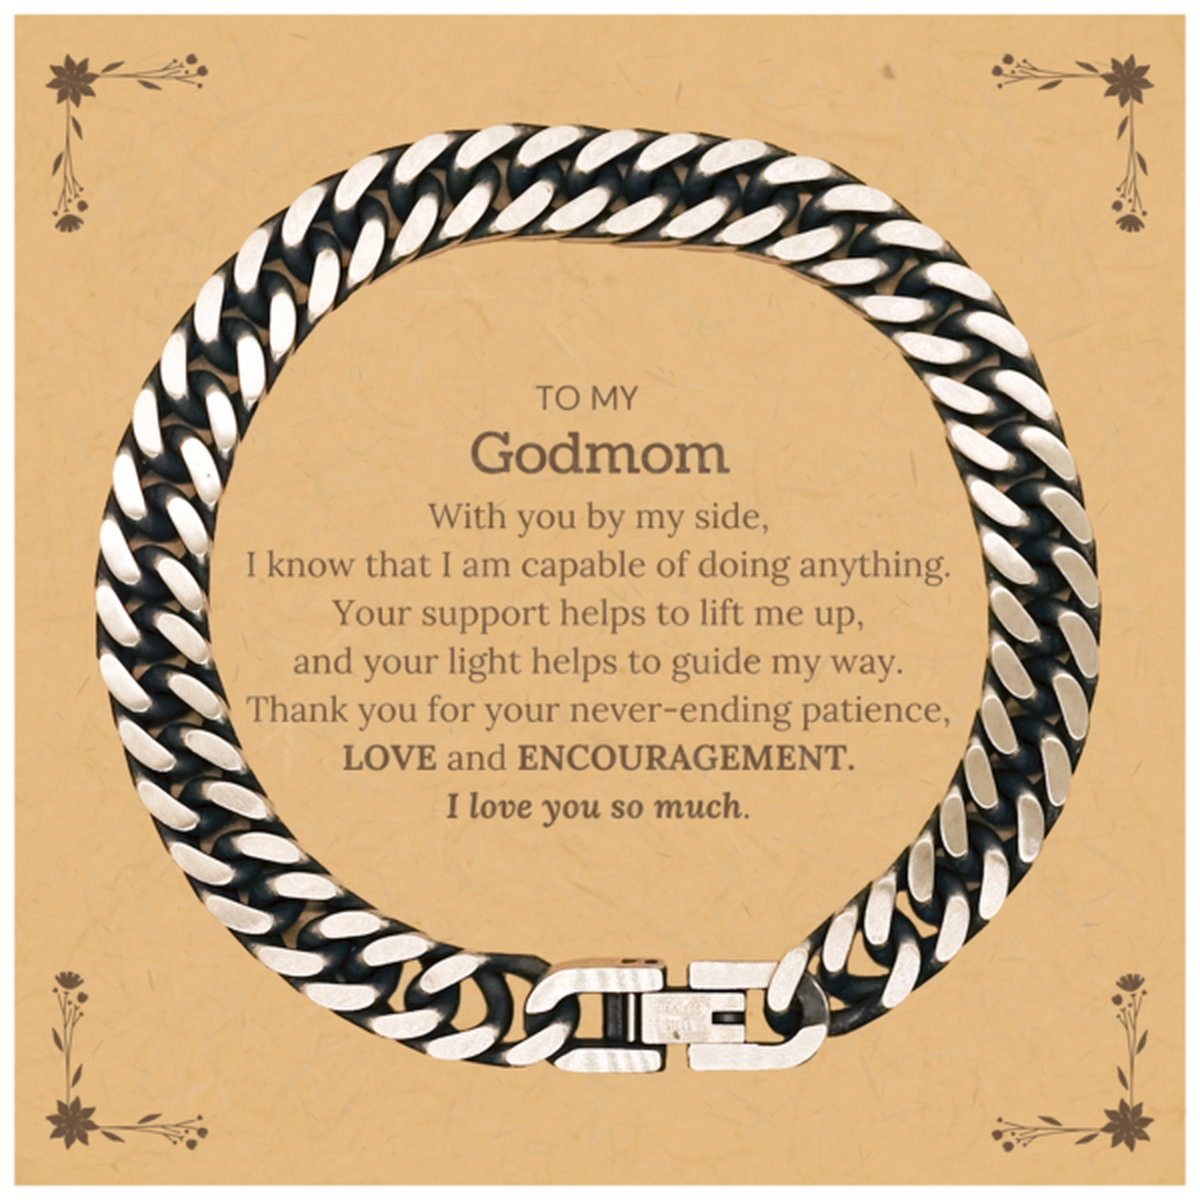 Appreciation Godmom Cuban Link Chain Bracelet Gifts, To My Godmom Birthday Christmas Wedding Keepsake Gifts for Godmom With you by my side, I know that I am capable of doing anything. I love you so much